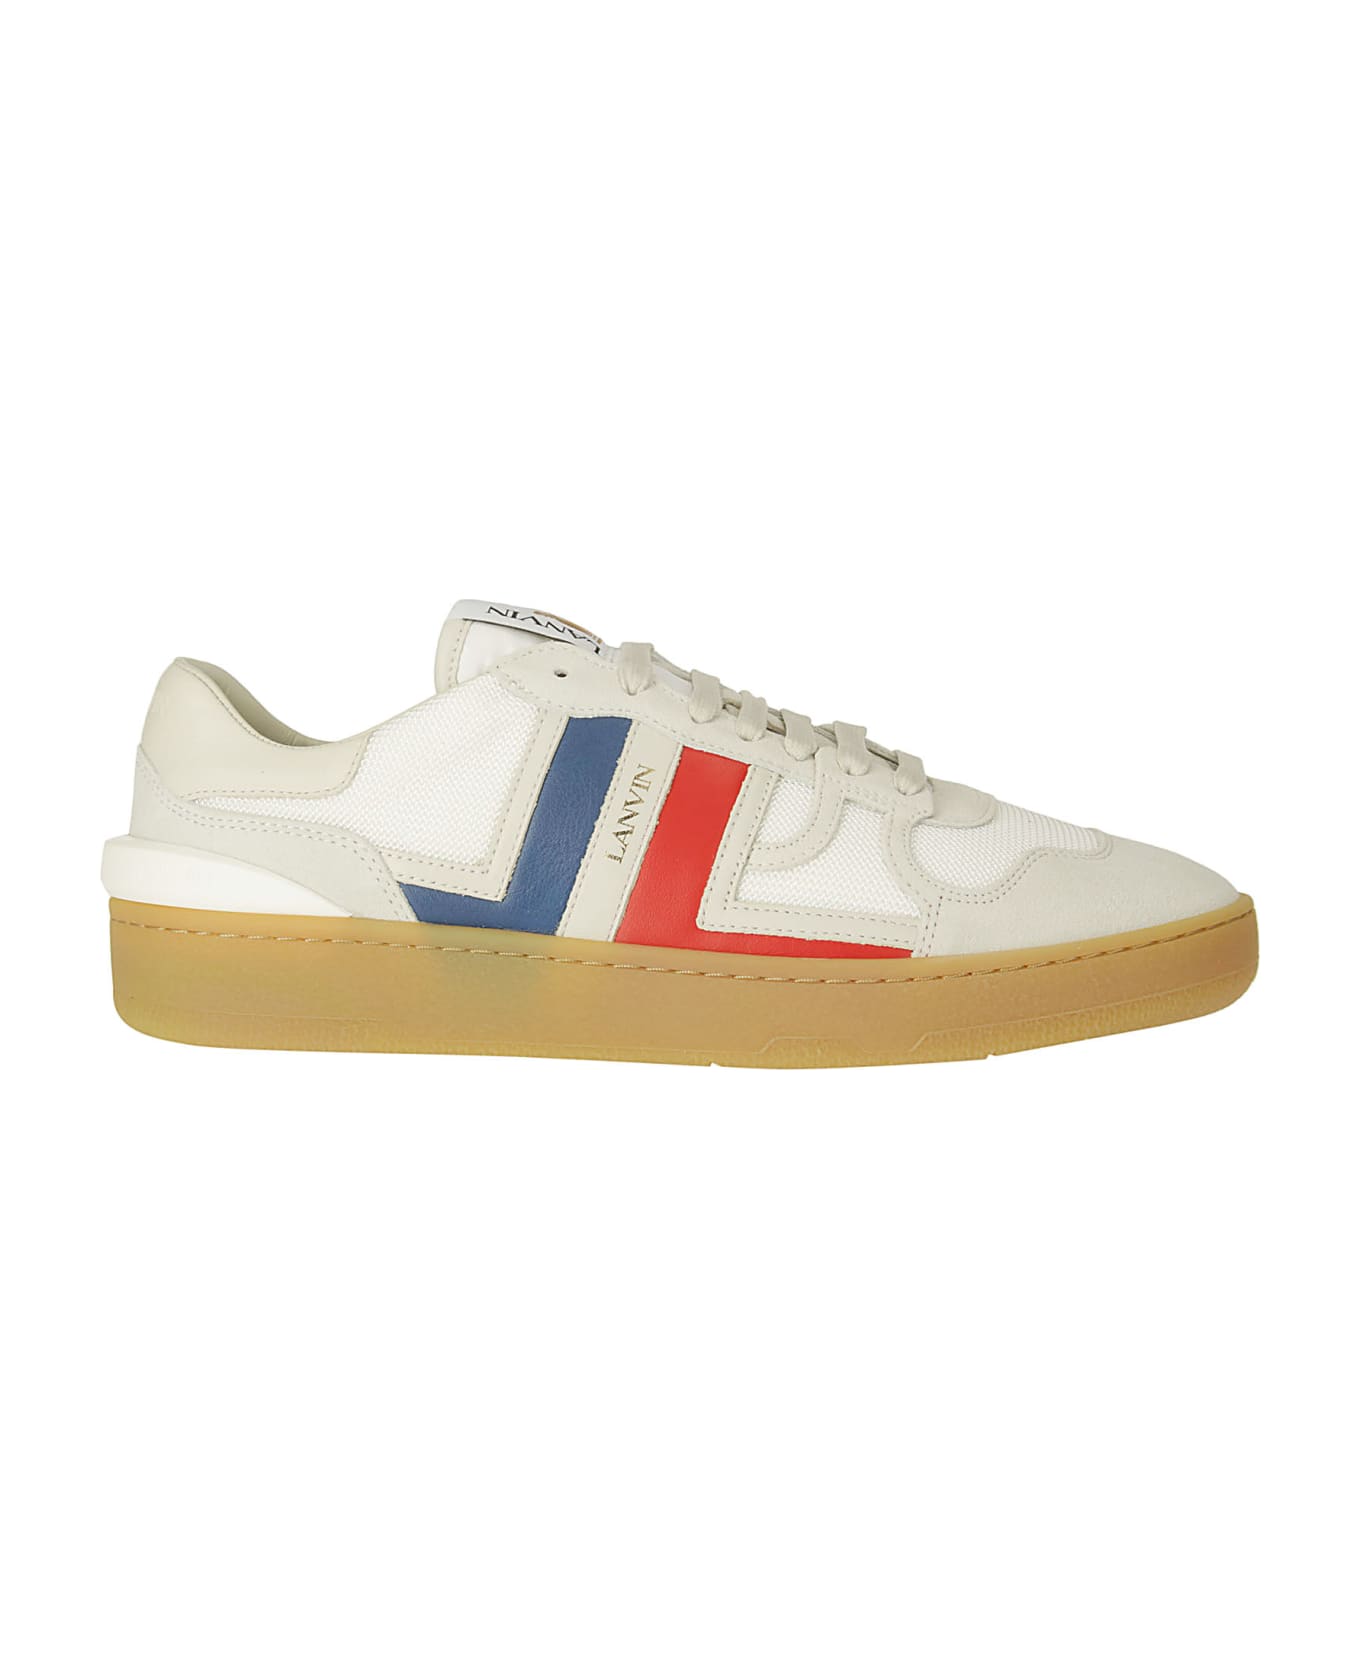 Lanvin Clay Low Top Sneakers - WHITE/MULTICOLOUR